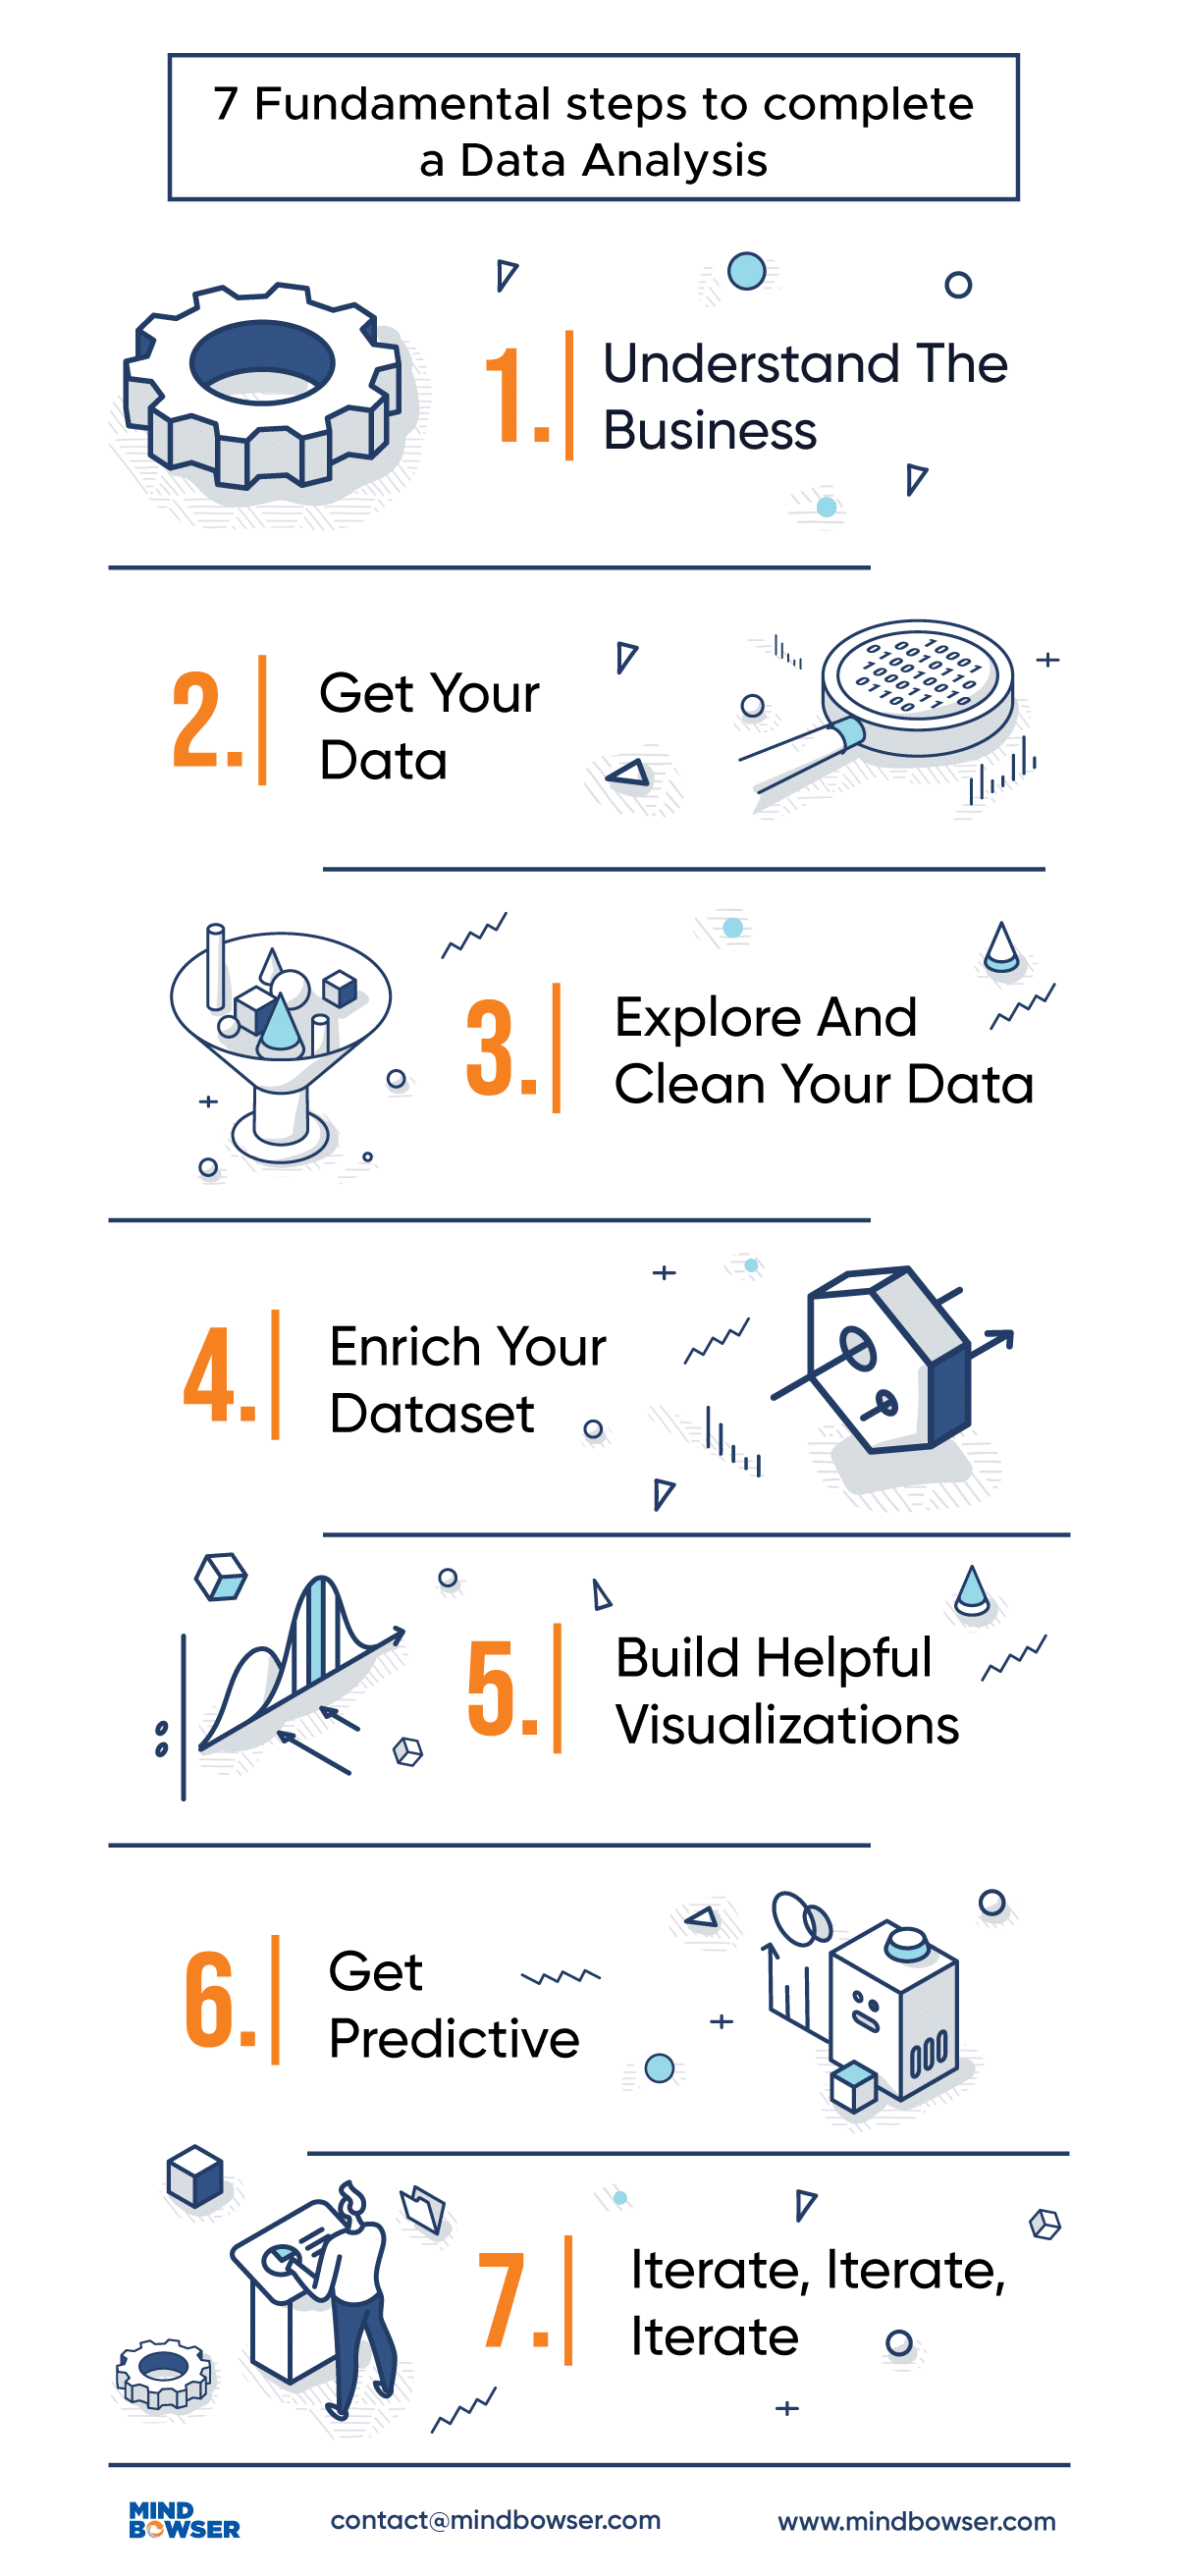 7 Steps In A Data Analytics Project | MindBowser